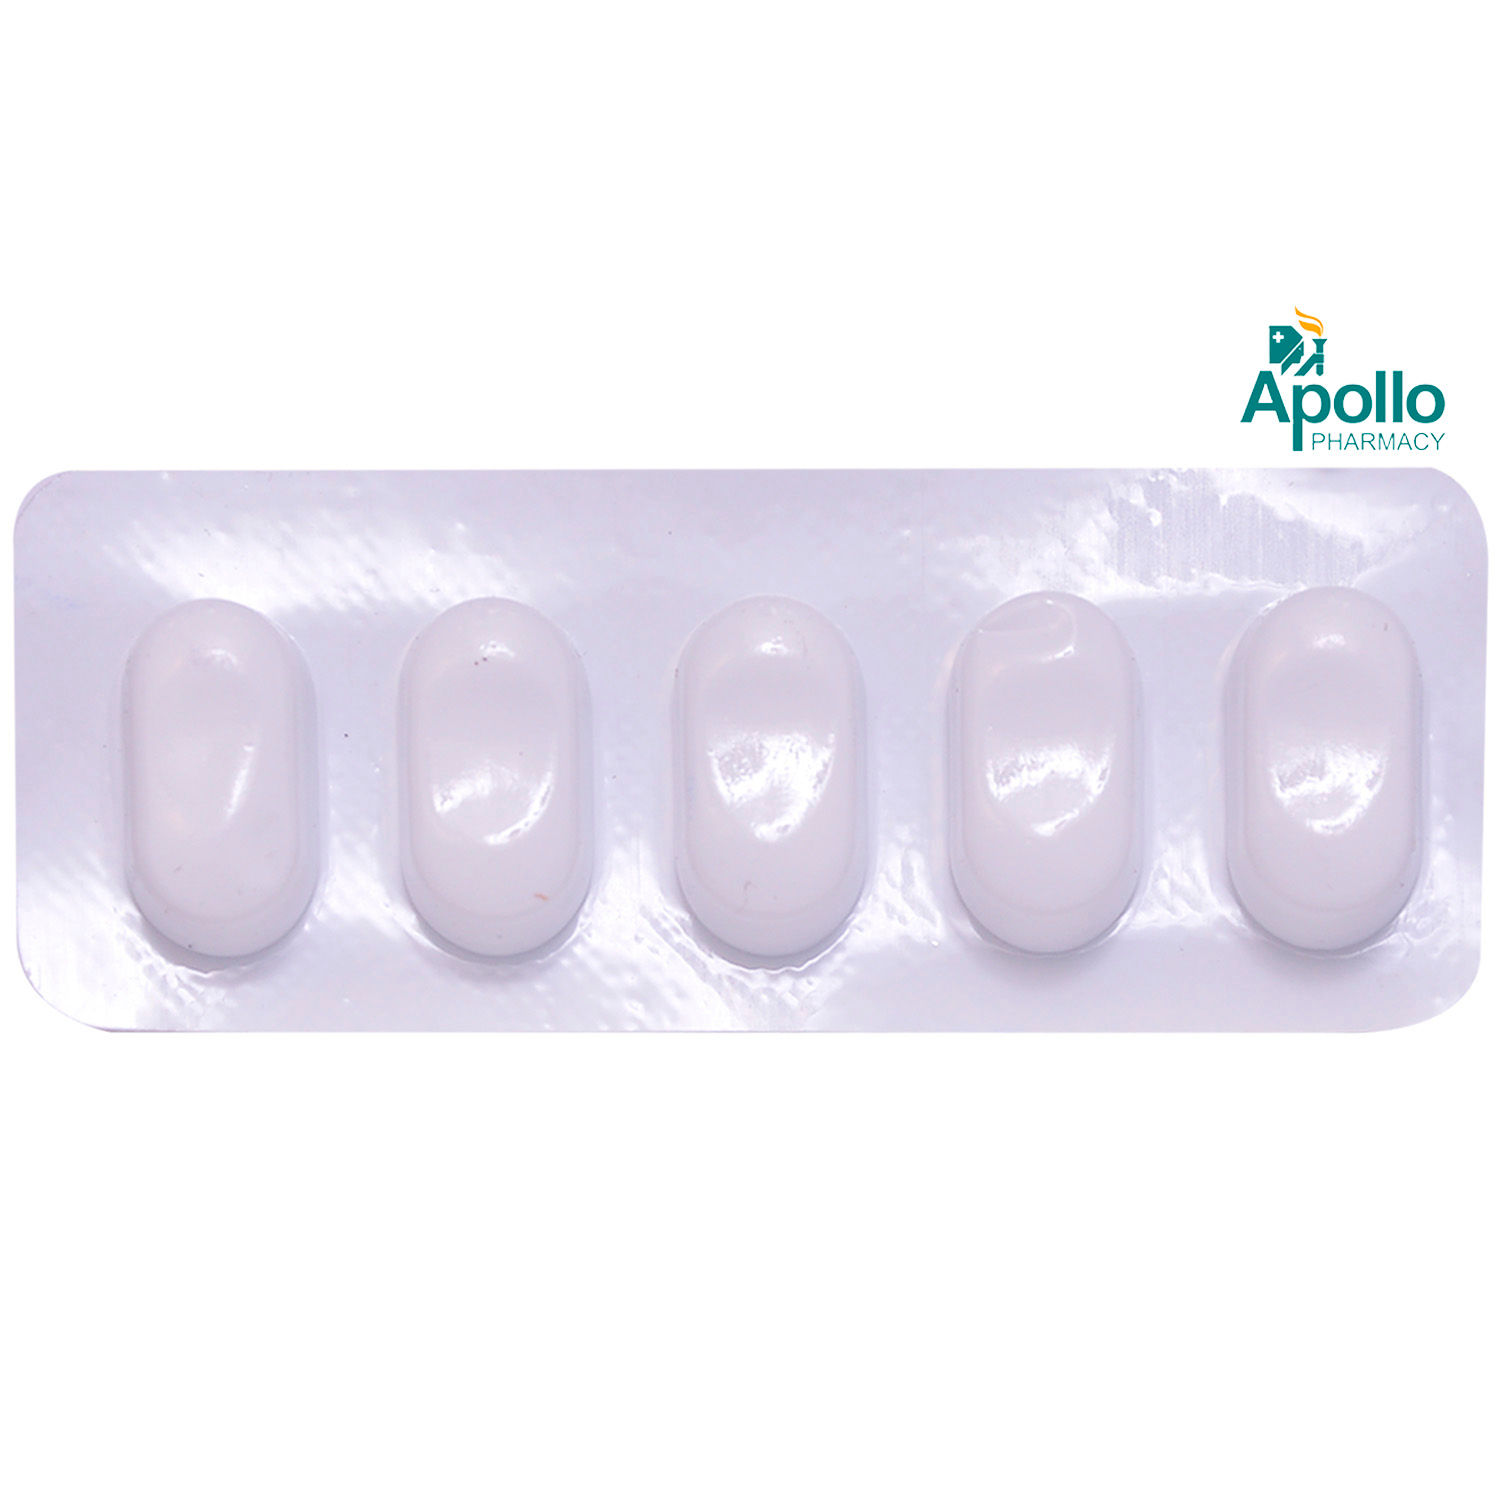 Azibact-500 Tablet 5's, Pack of 5 TABLETS